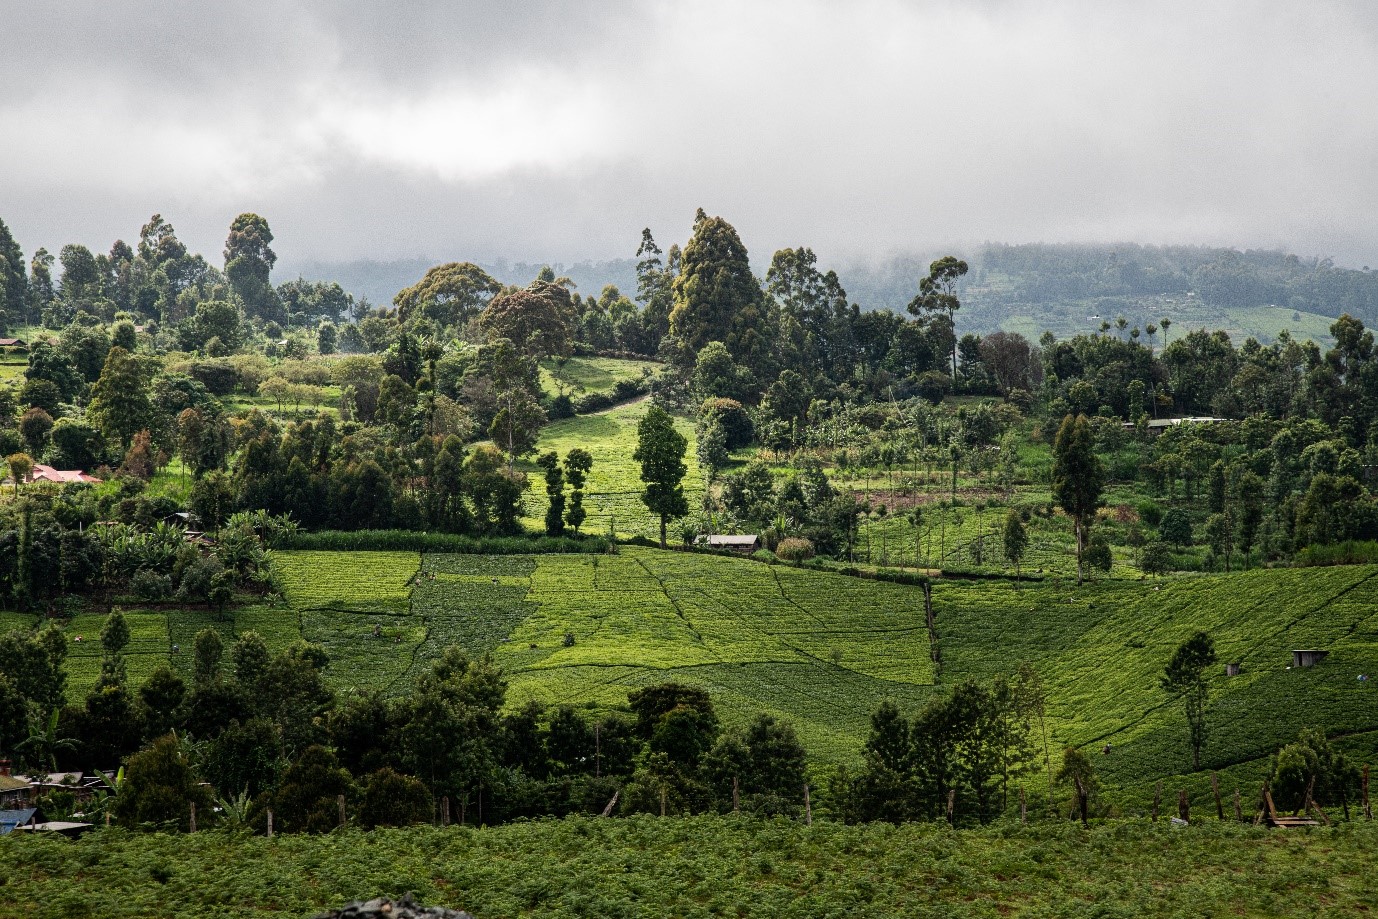 The slopes around Simon and Sylvia Kiruja’s dairy farm in Meru, Kenya. The family is among those who have received training and new technology like the Brachiaria fodder grass varieties to improve milk yields.